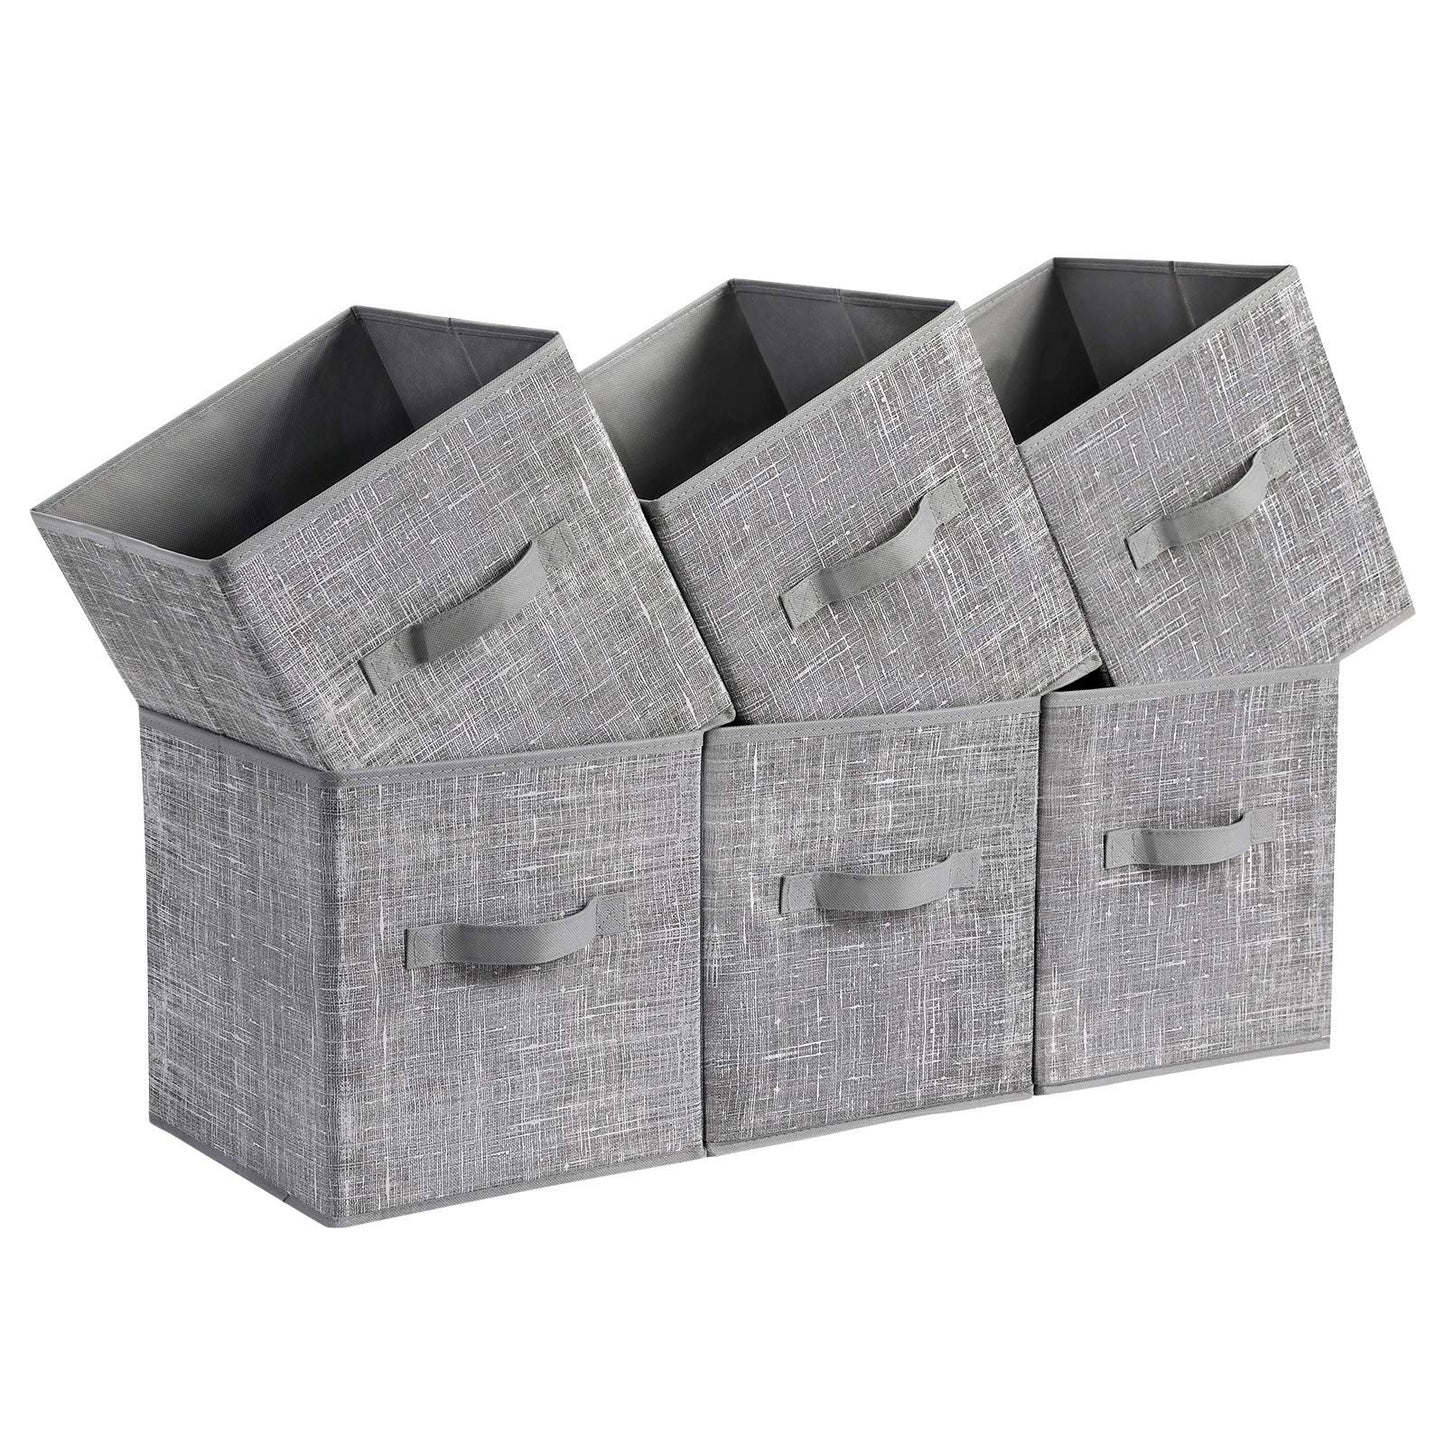 Storage Cubes, 11-Inch Non-Woven Fabric Bins with Double Handles, Set of 6